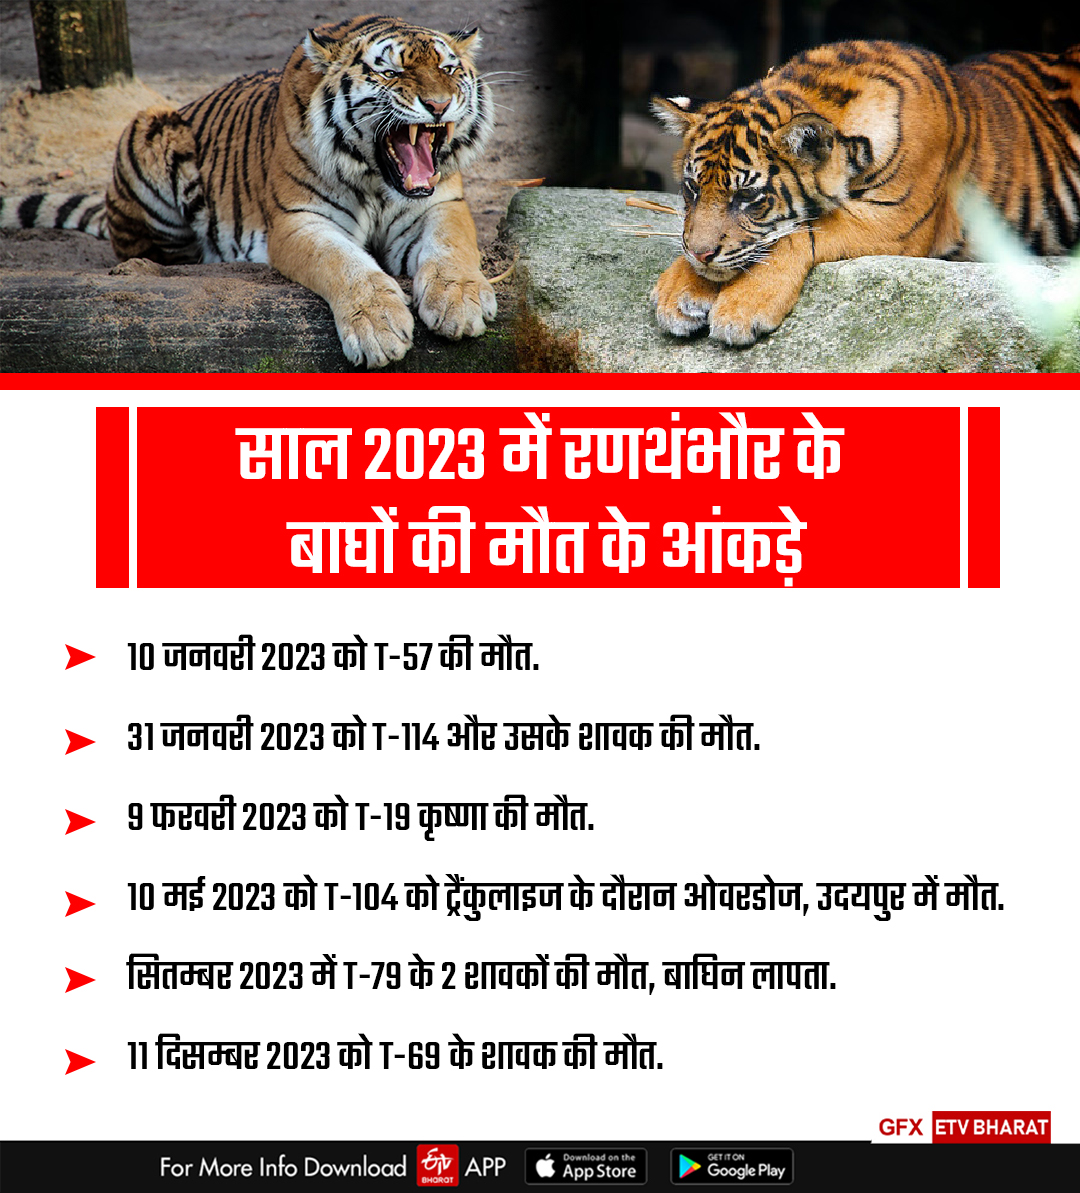 Death of tigers in Ranthambore